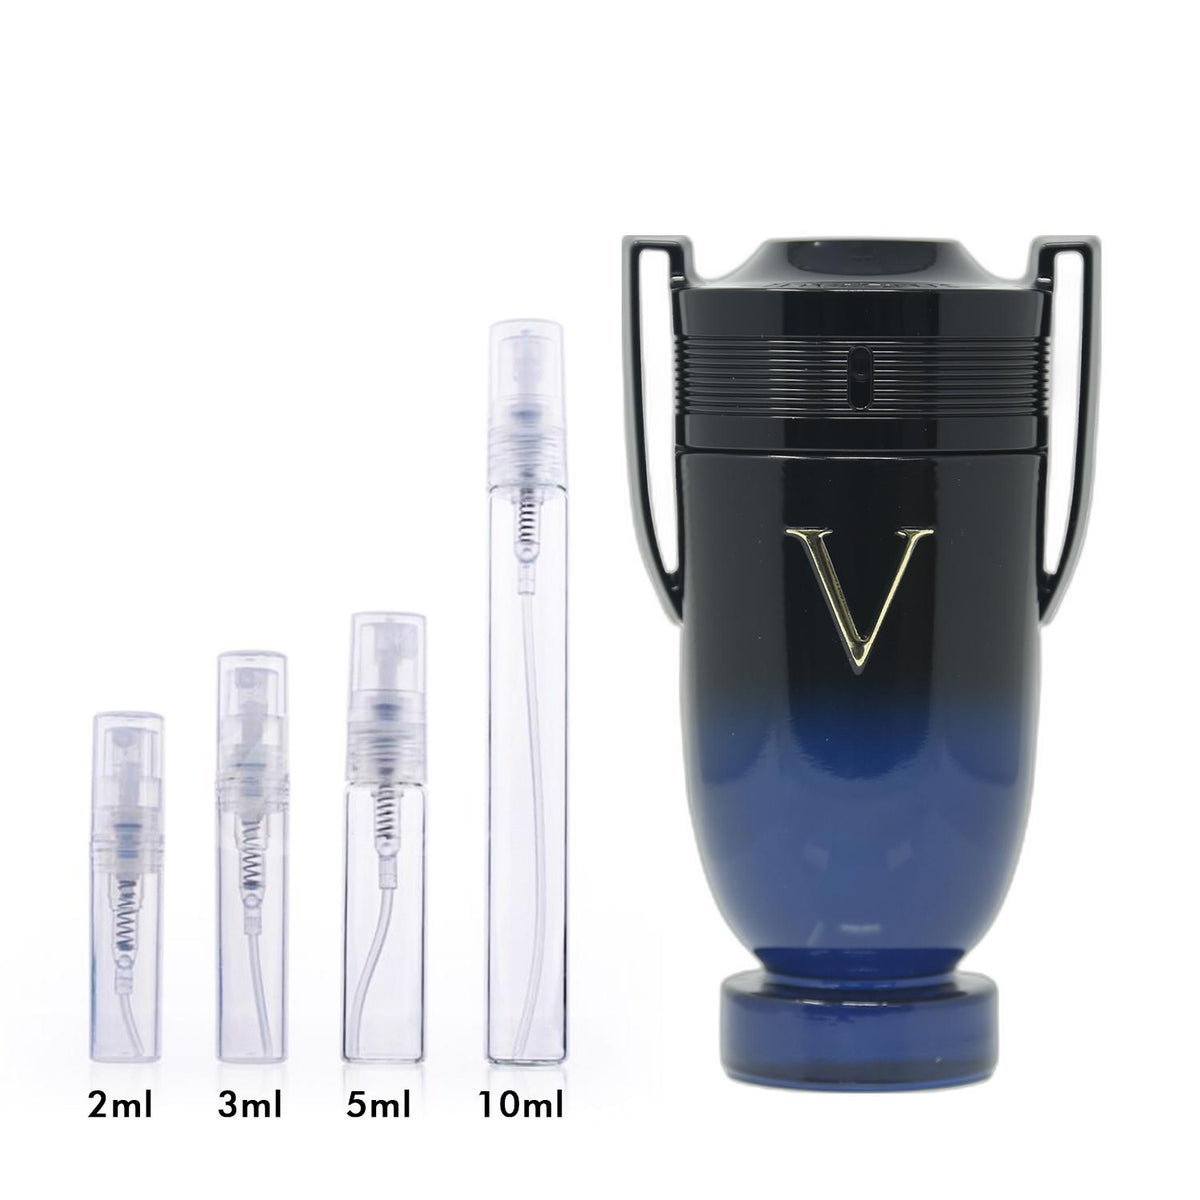 Invictus Victory Elixir Intense by Paco Rabanne Fragrance Samples, DecantX